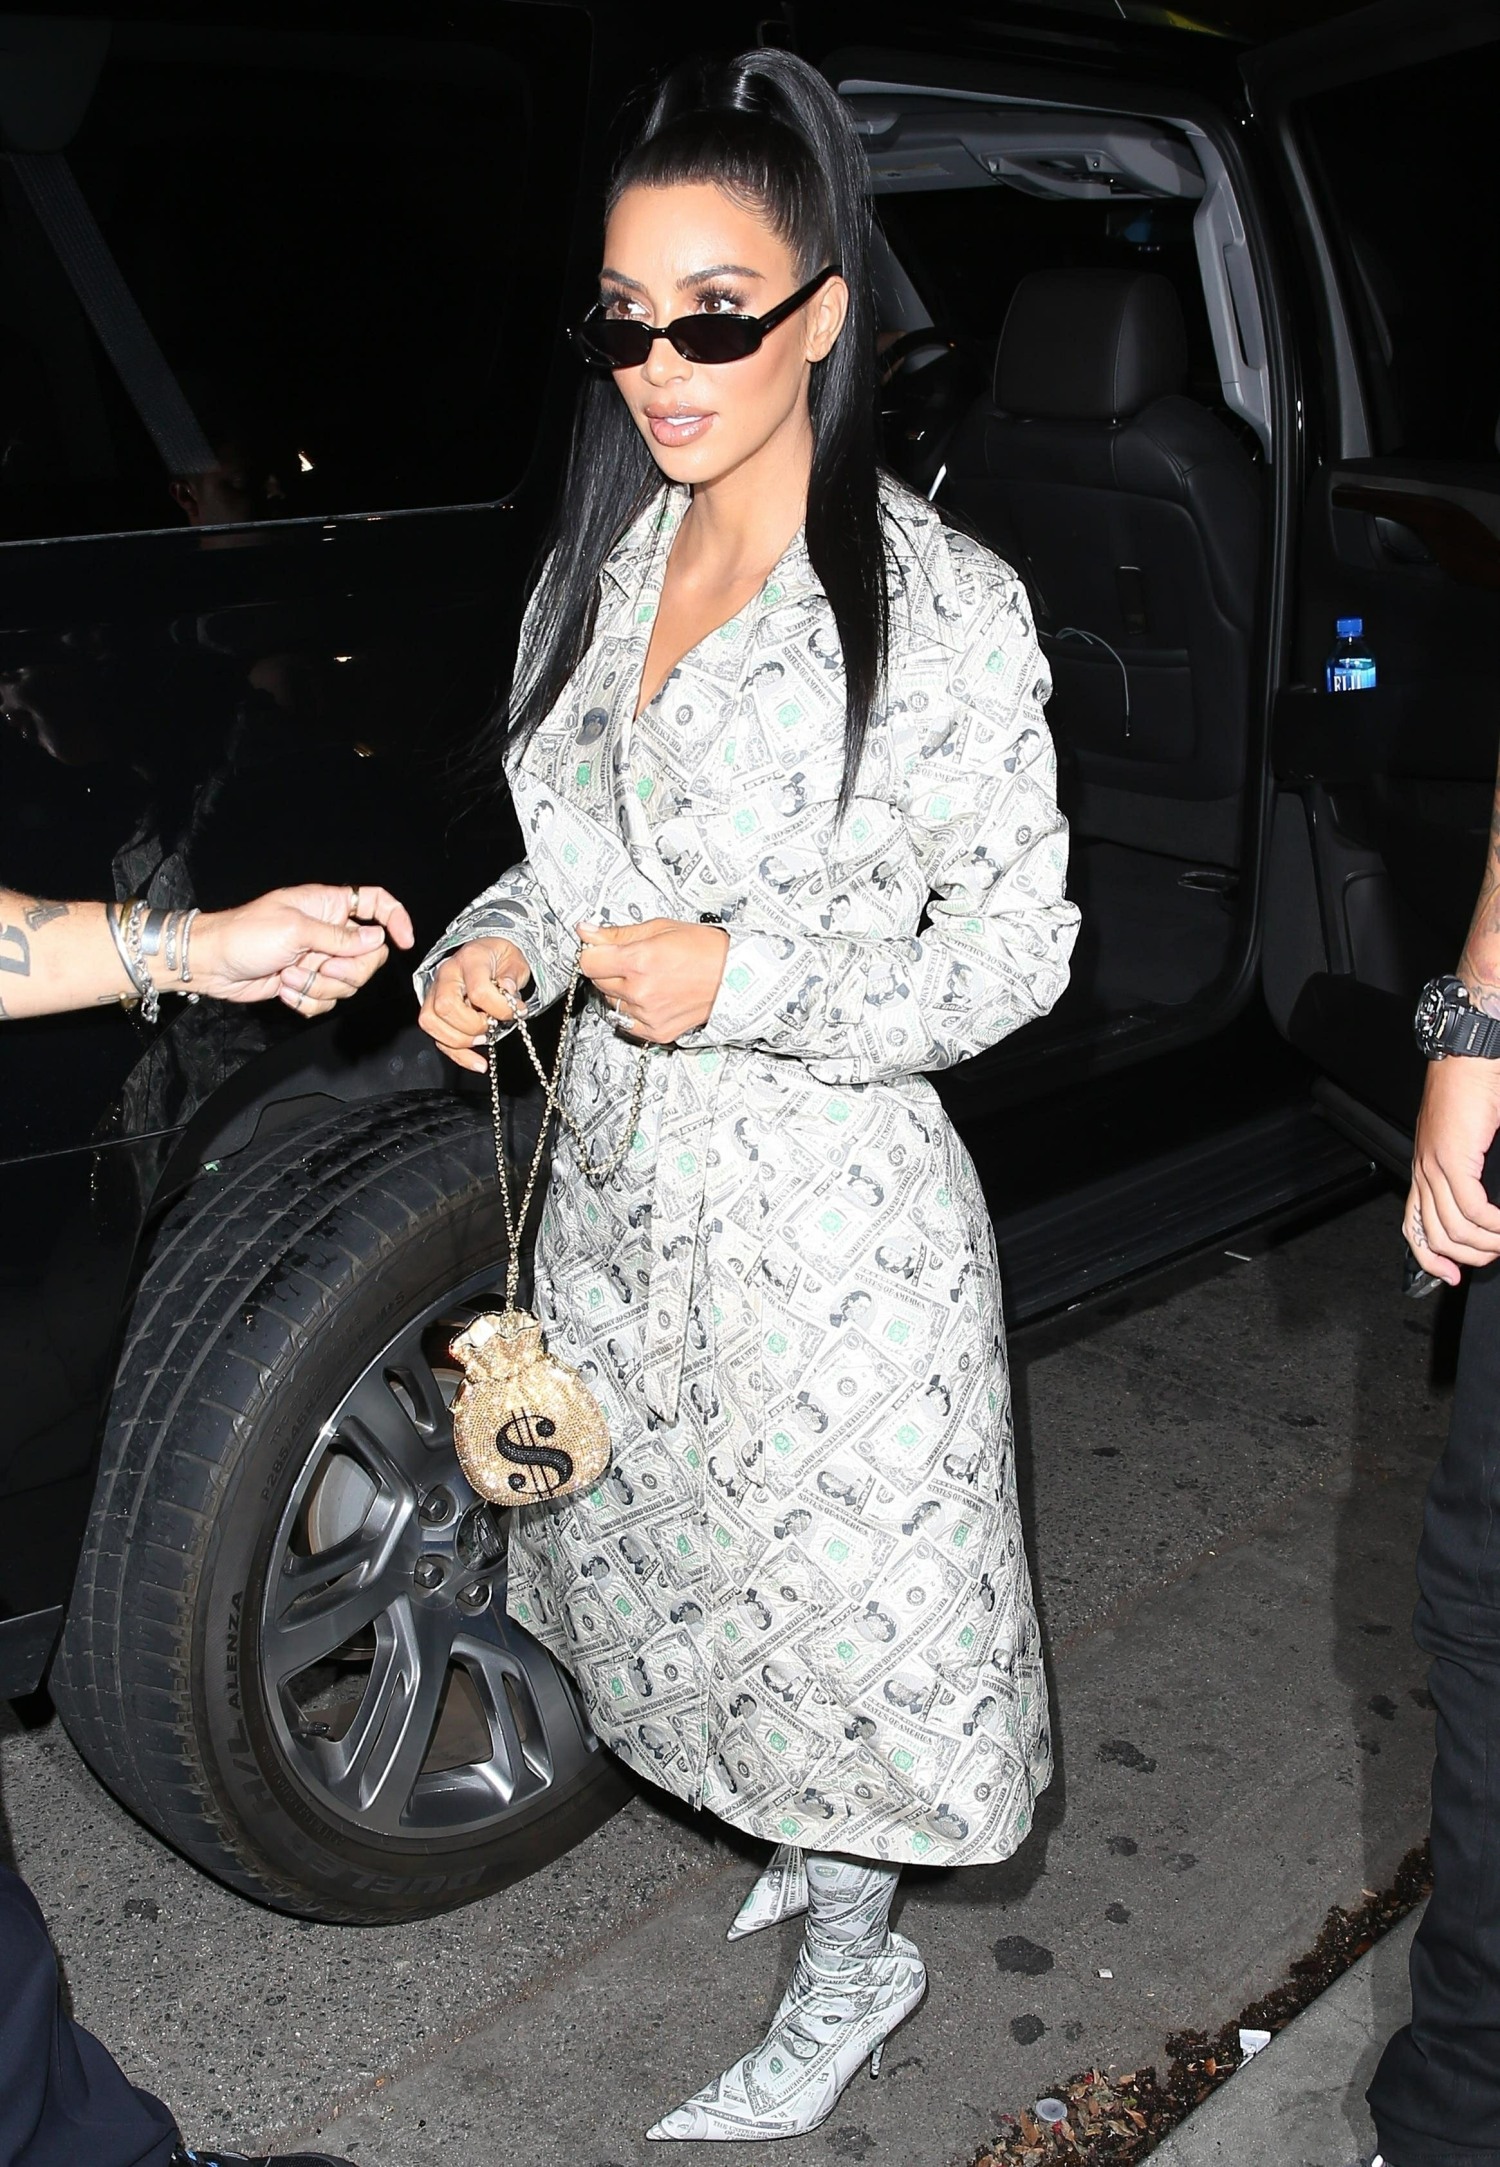 Kim Kardashian is dripping in Money as she arrives at Delilah in West Hollywood